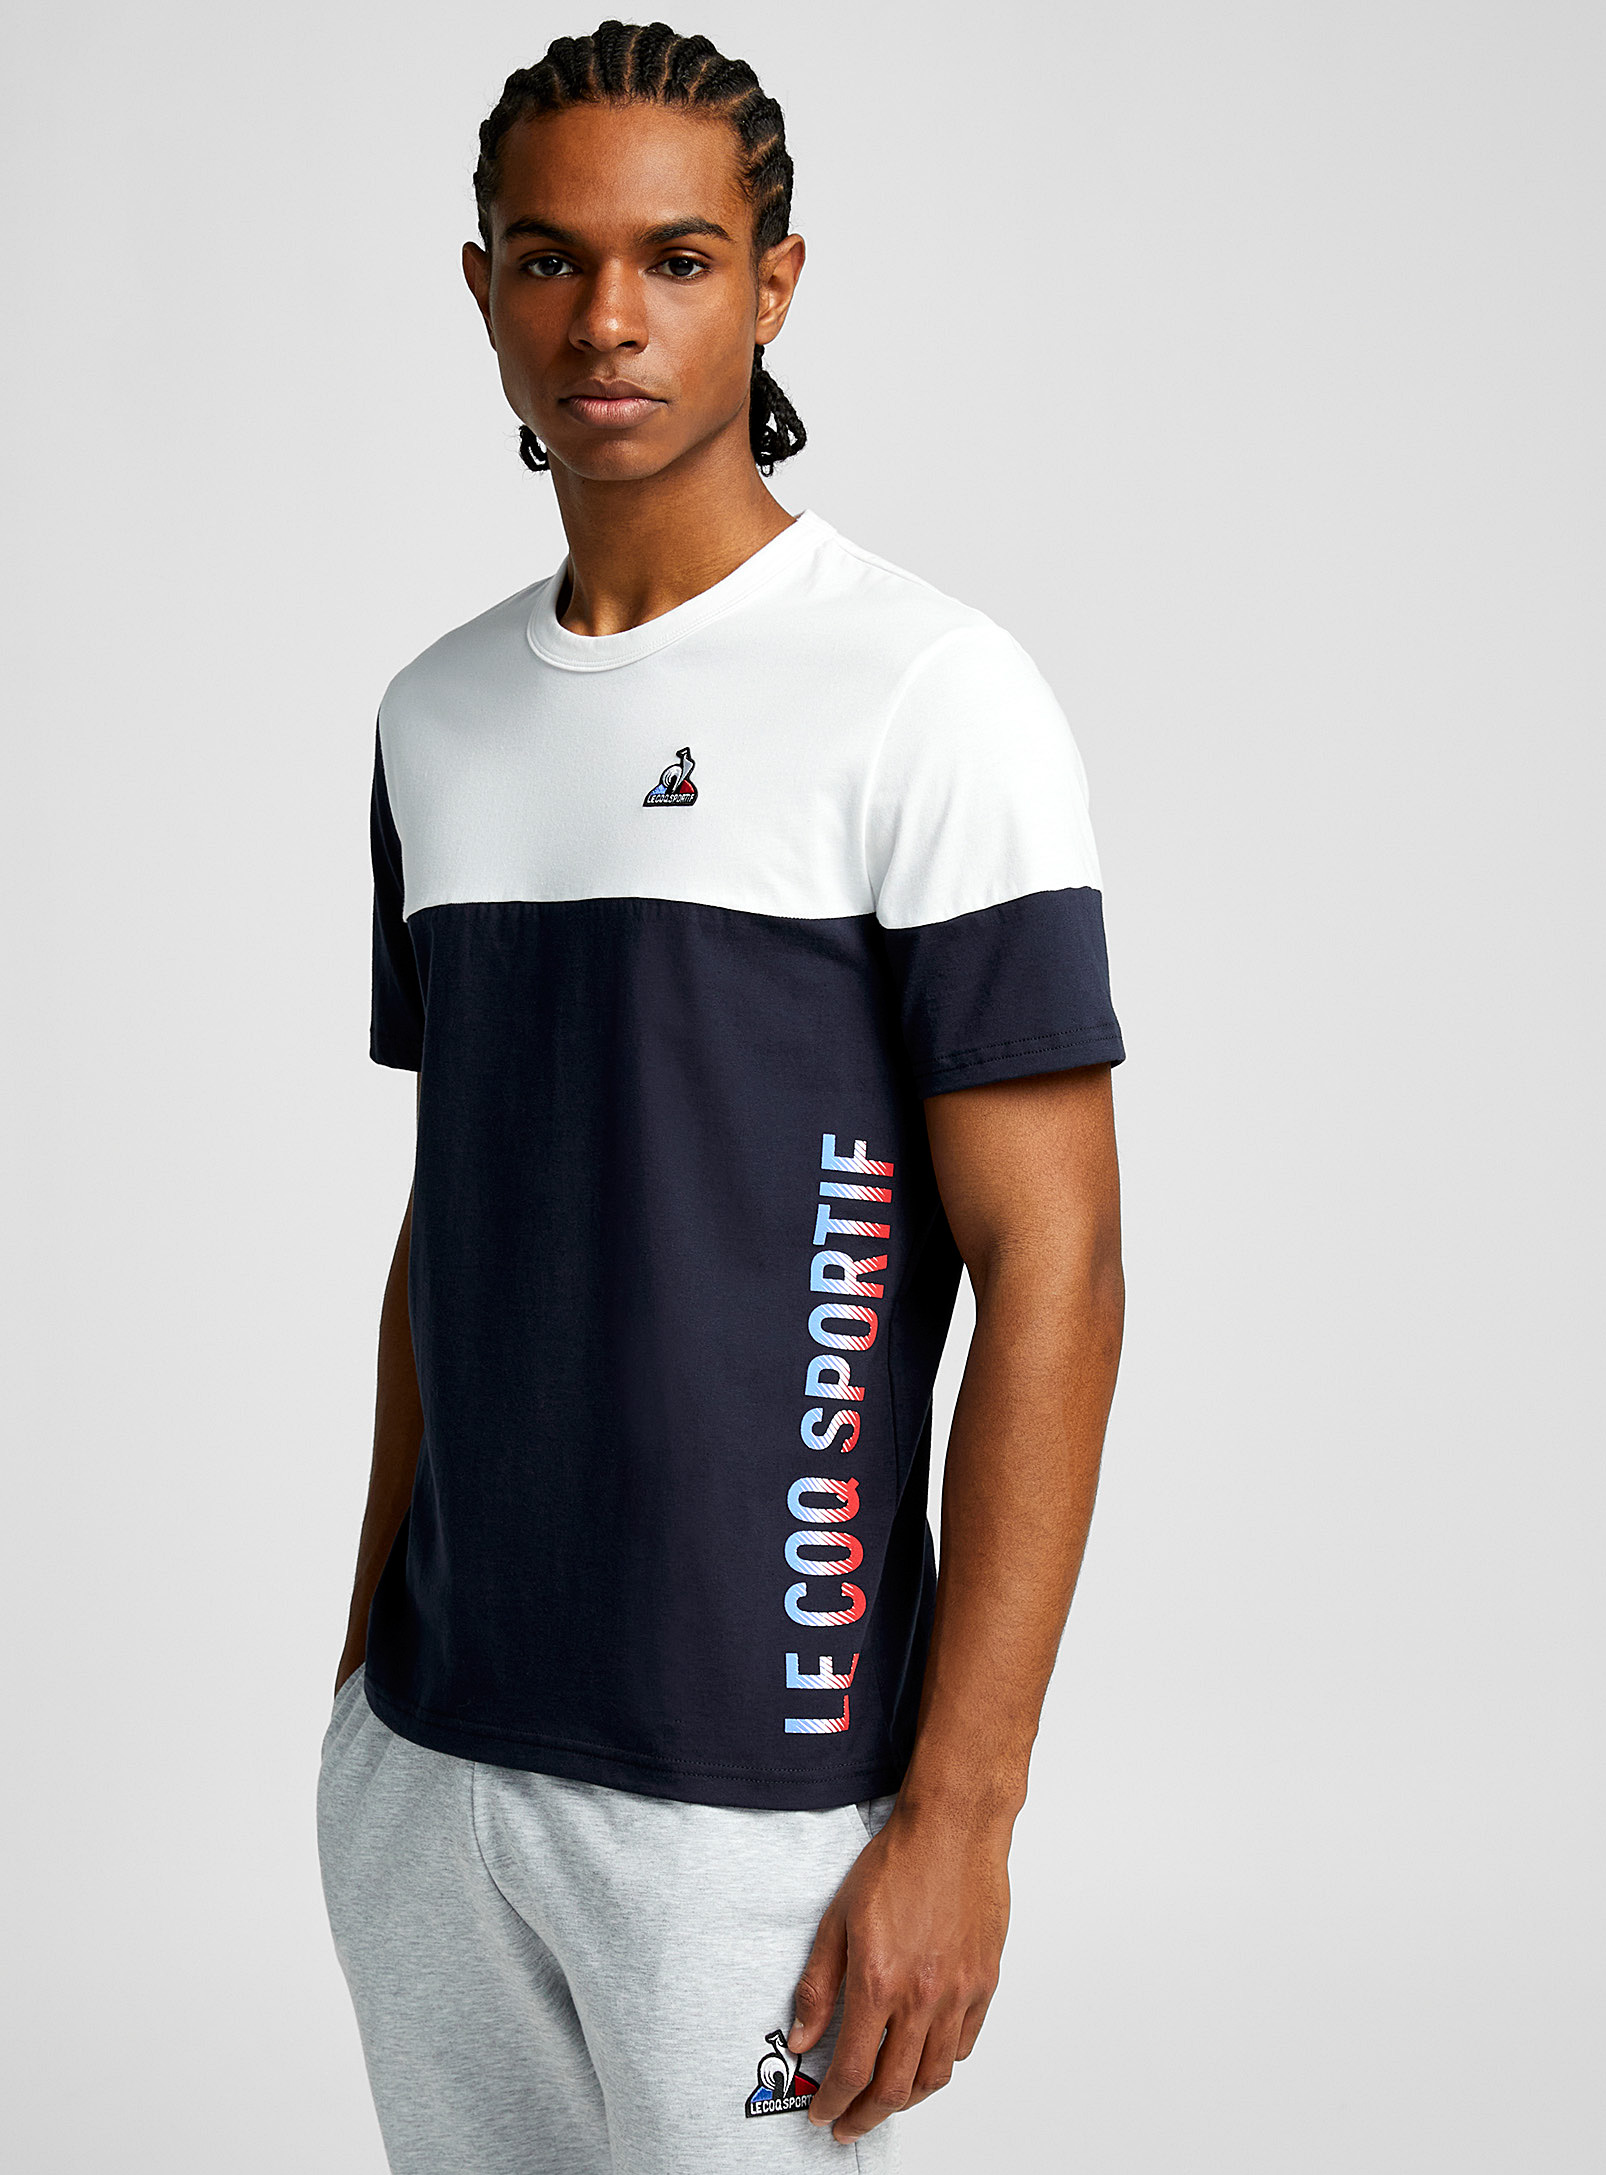 Le Coq Sportif Two-tone Block T-shirt In Patterned White